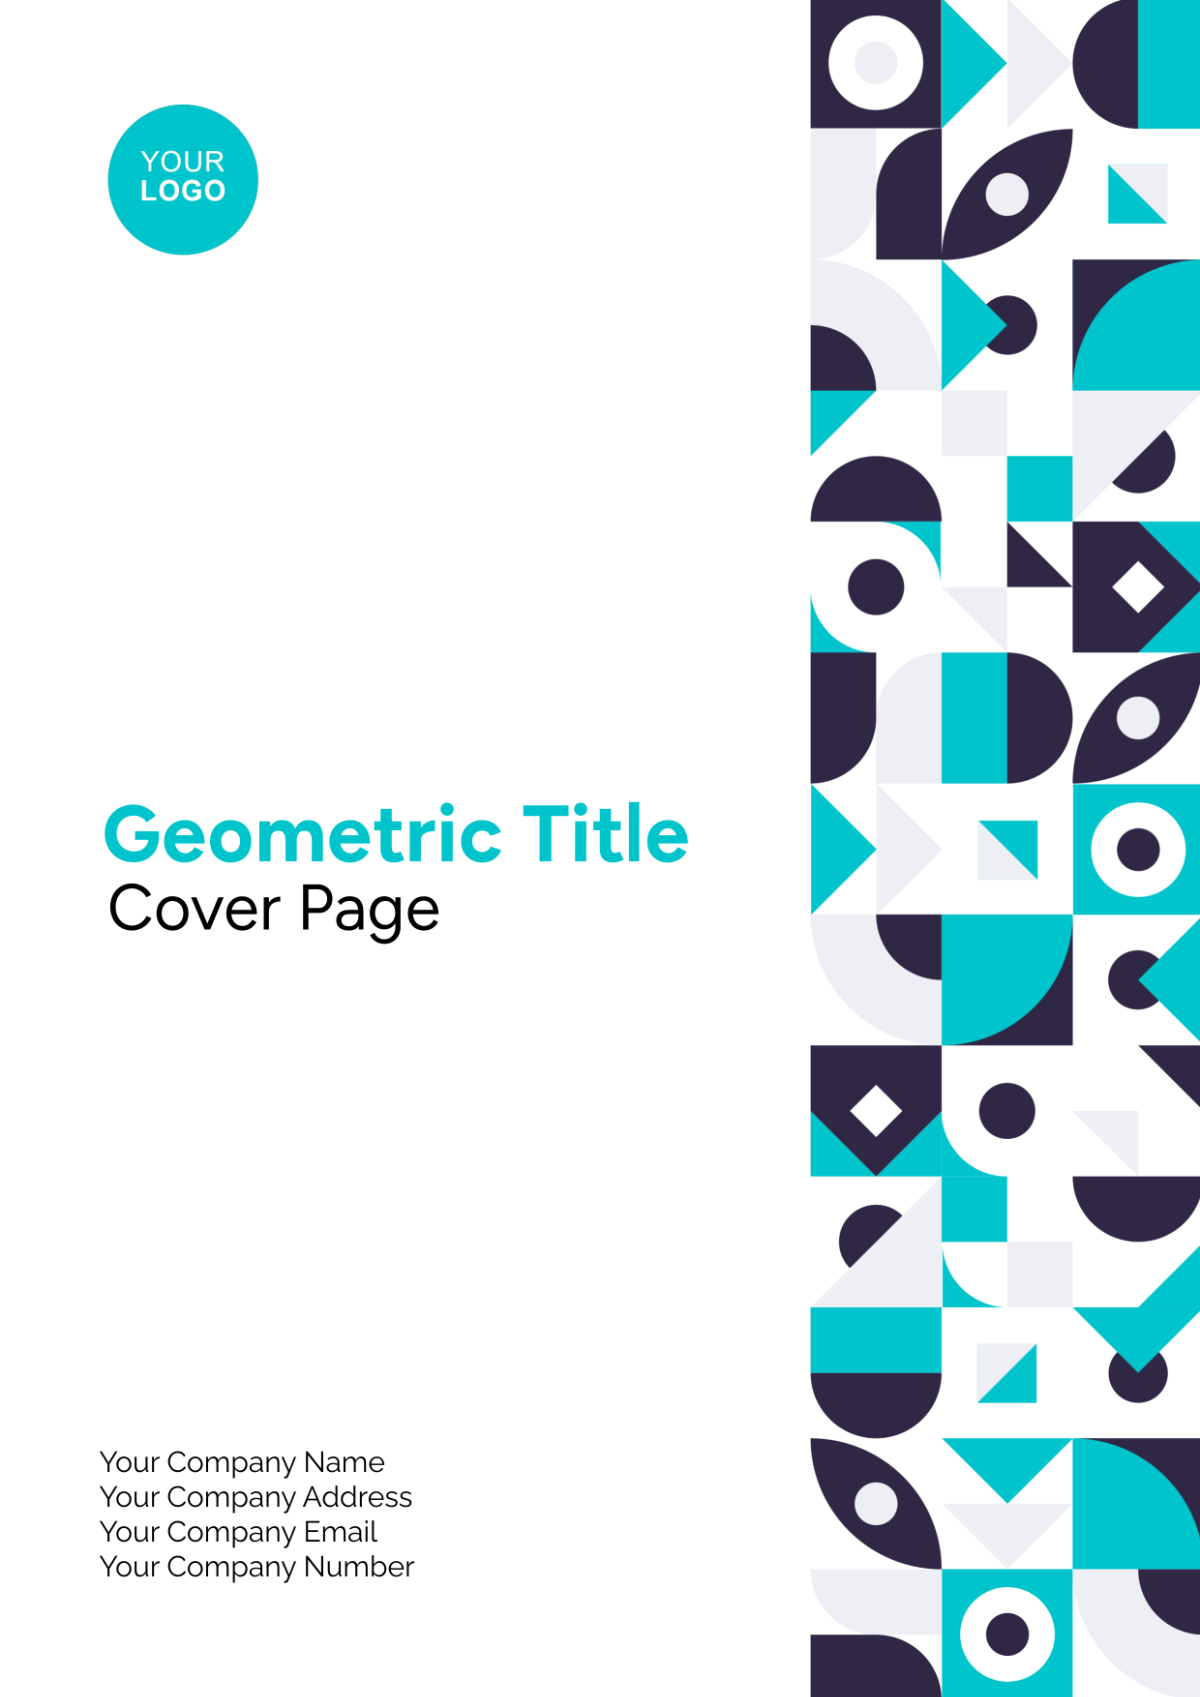 Geometric Title Cover Page